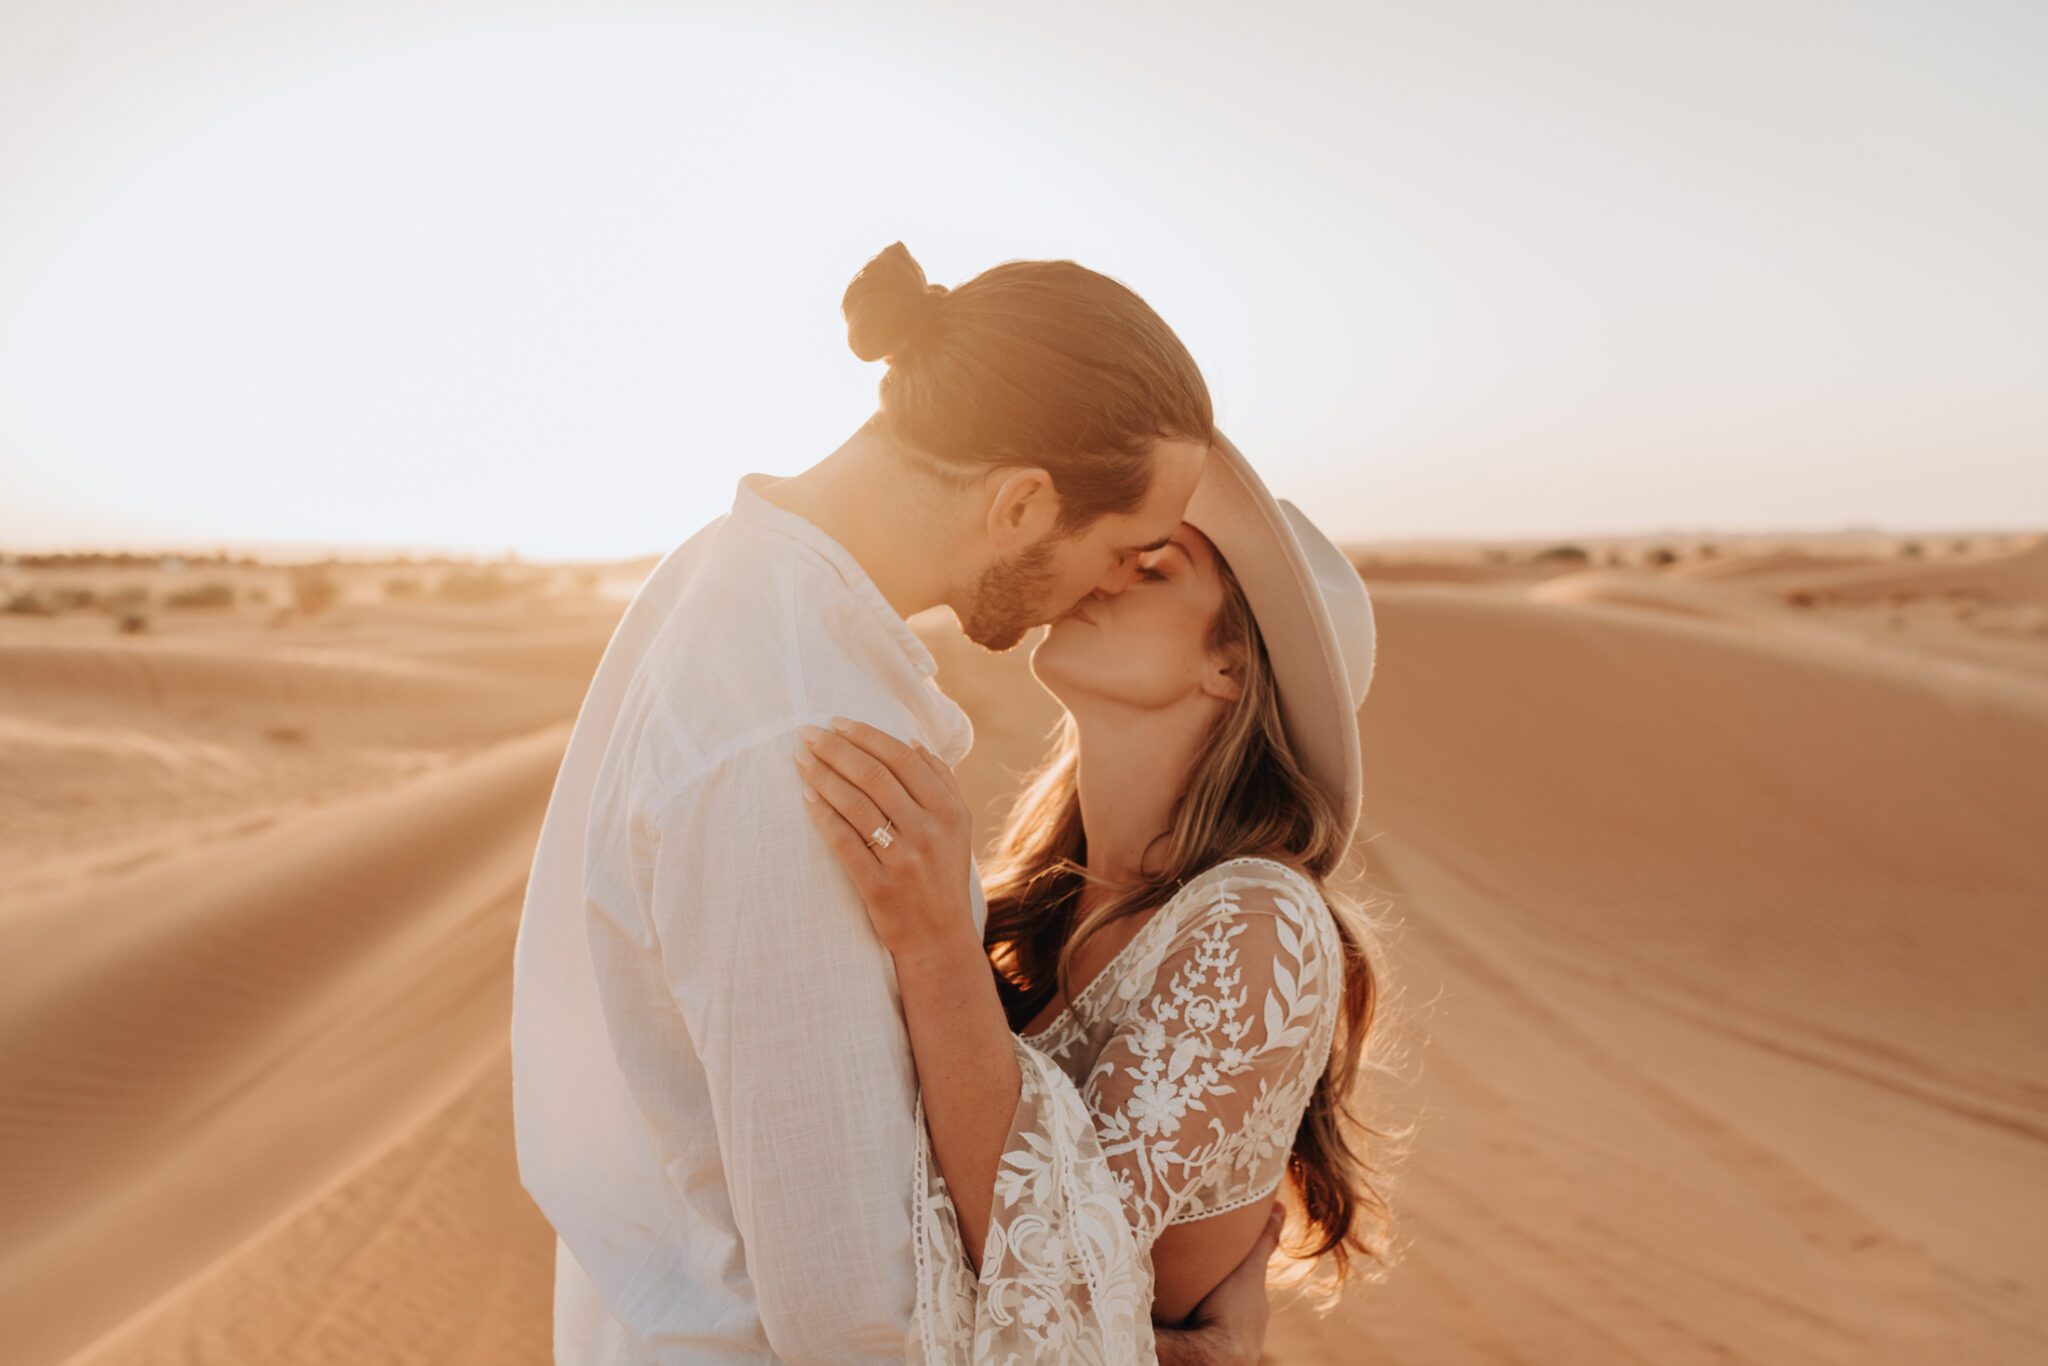 Couple kissing during their golden sunrise desert engagement session, woman wearing boho inspired lace gown.